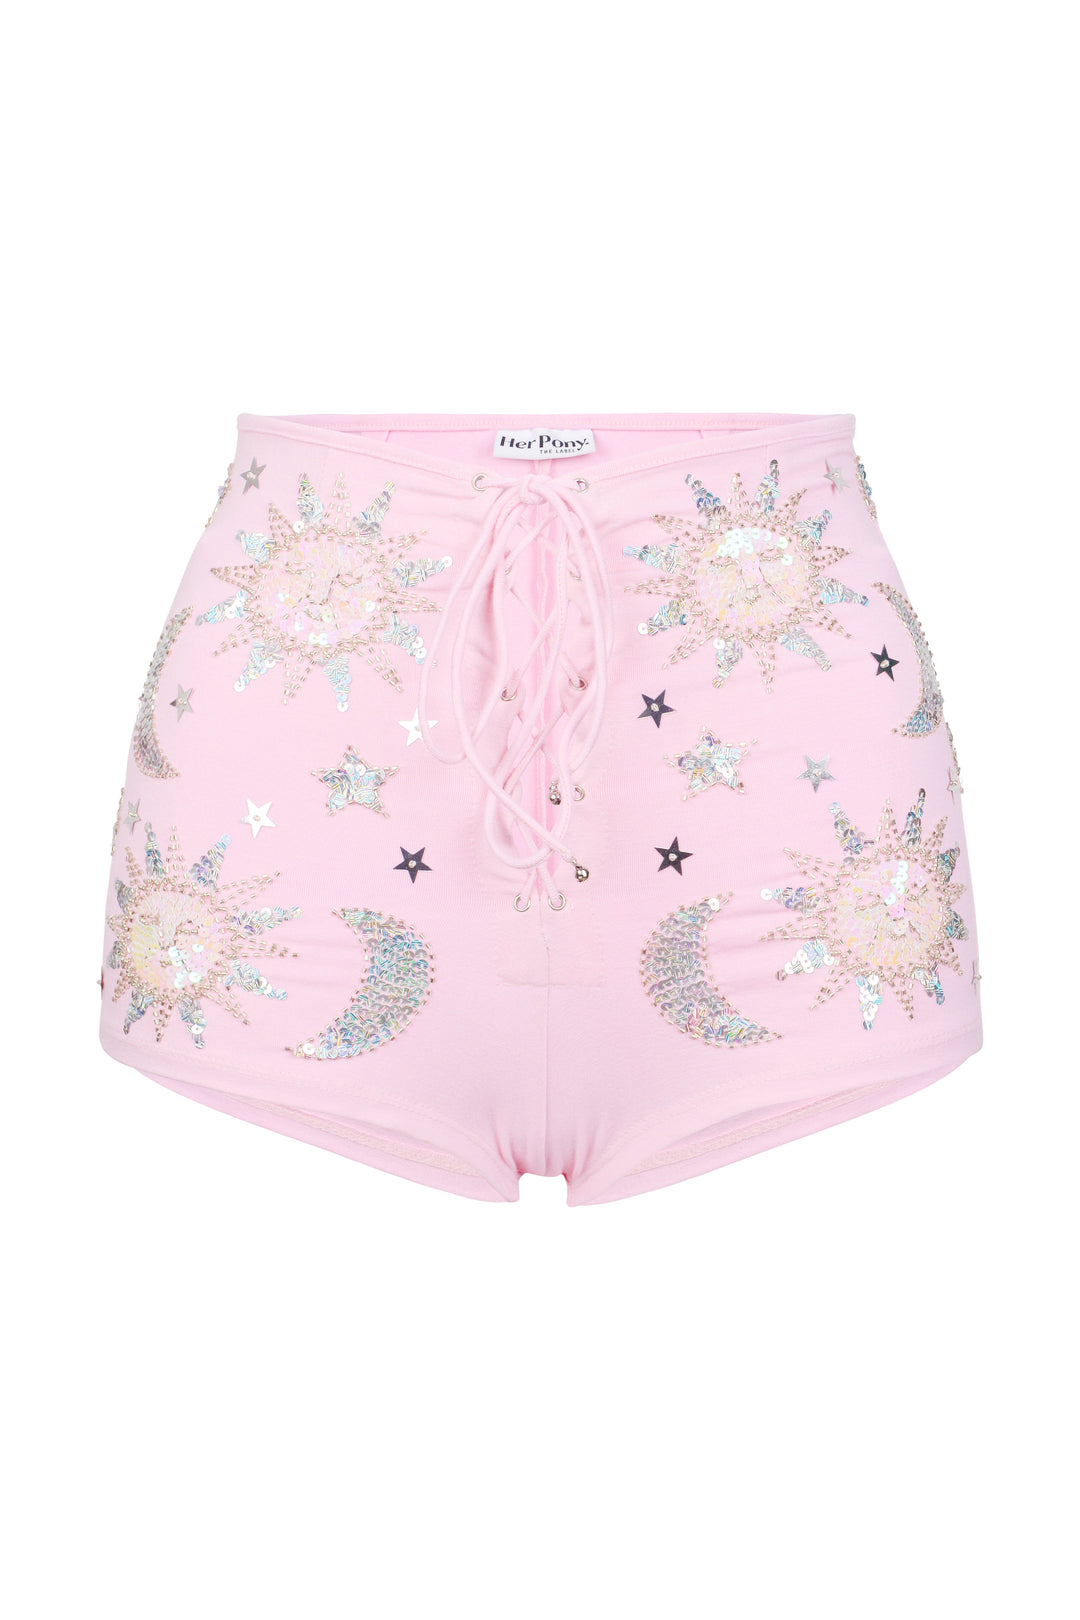 STELLA SEQUIN SPARKLE HOT PANT SHORTS - PINK/SILVER - Her Pony